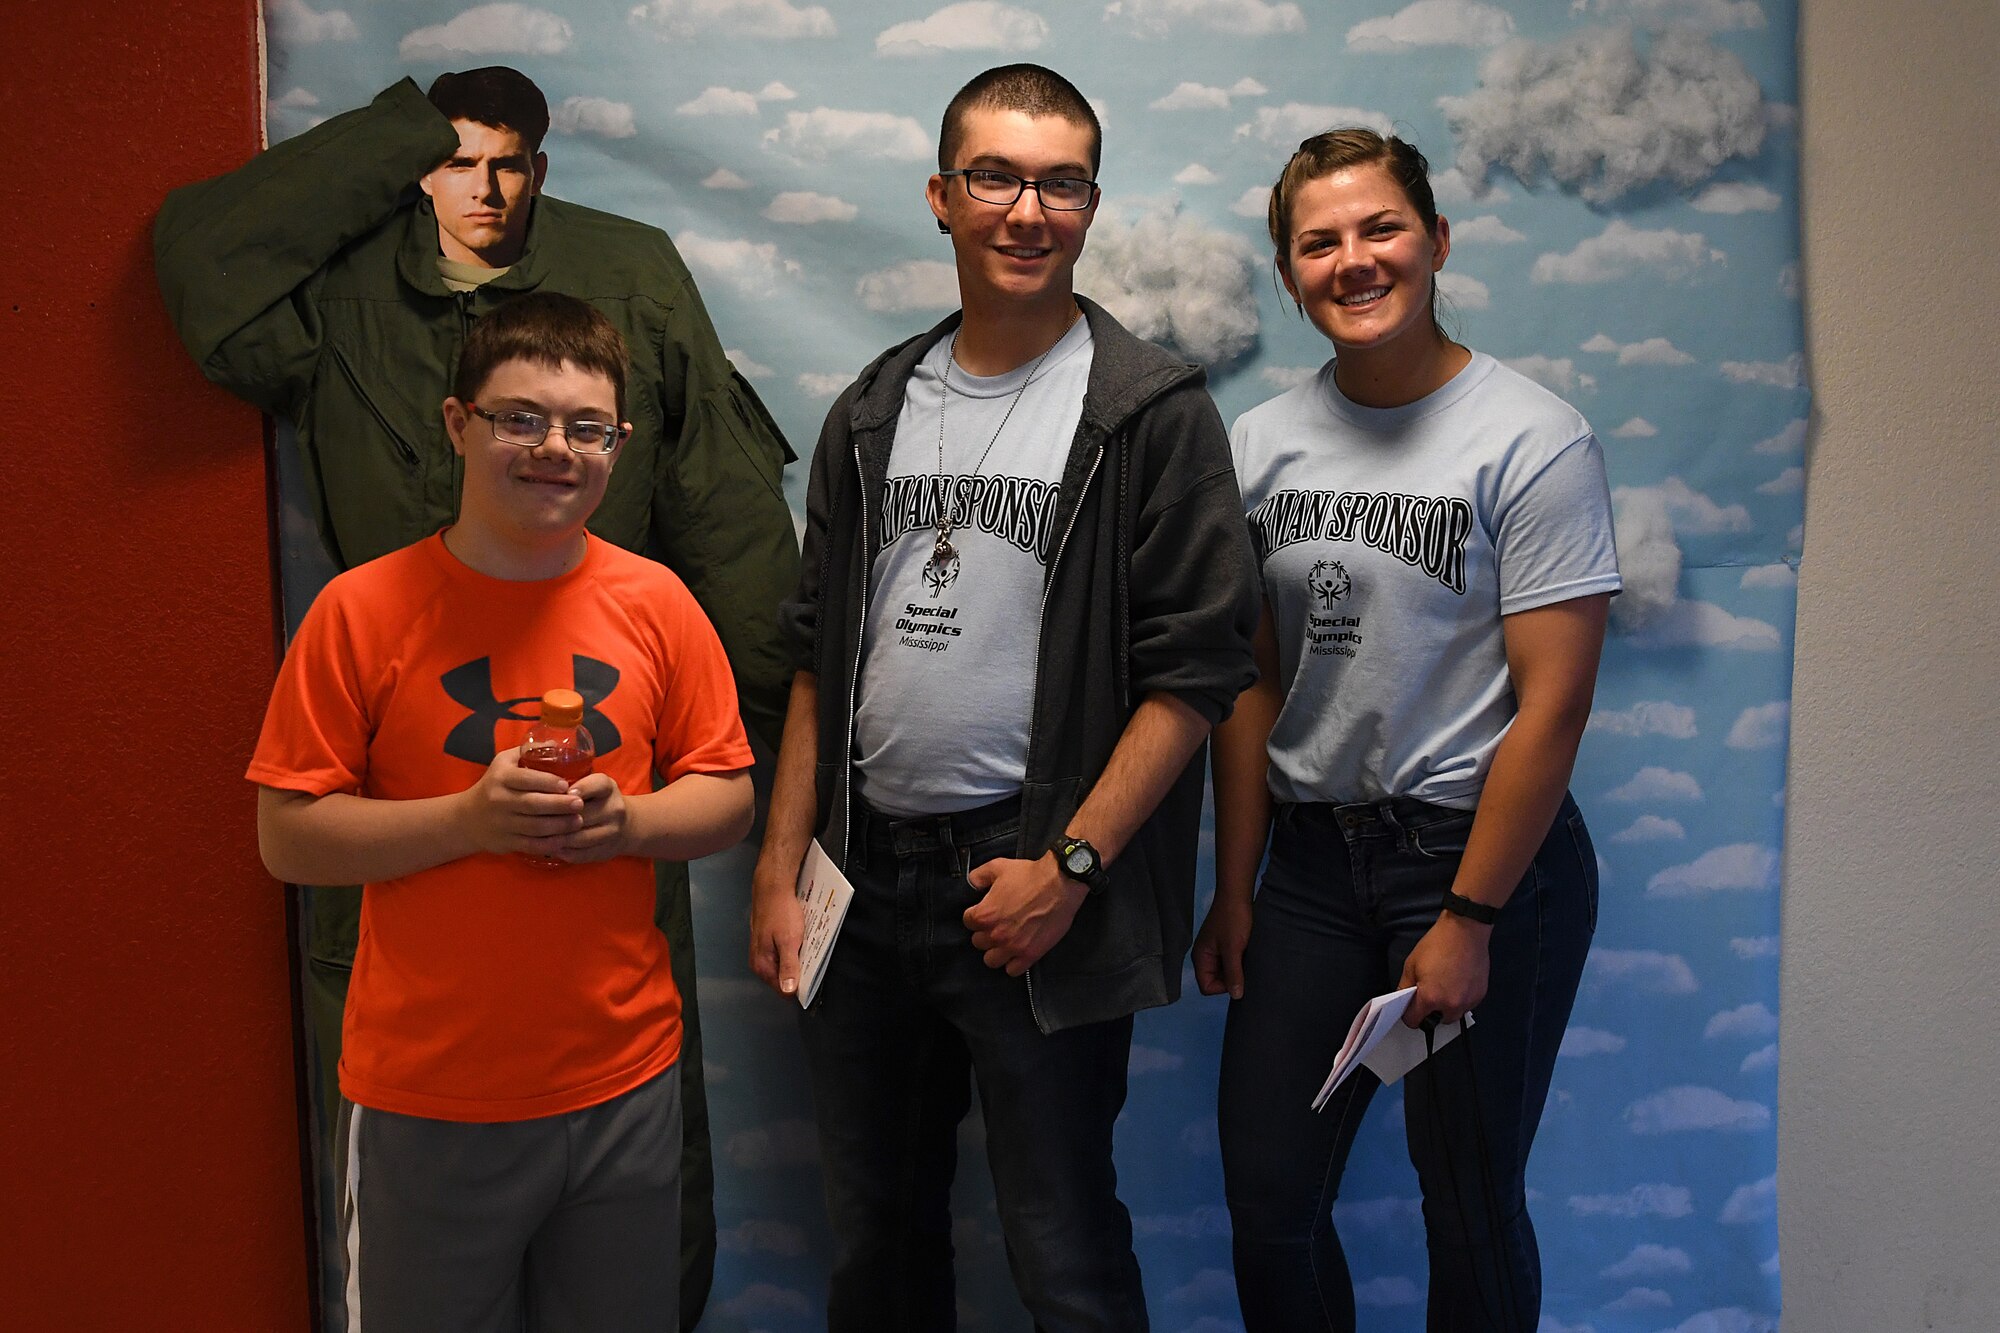 Easton Slutz, District 5 Special Olympics Mississippi athlete, U.S. Air Force Airmen Gabriel Agostini-Mesa and Kaimryn Hursch, 336th Training Squadron students, pose for a picture during SOMS in Smith Manor at Keesler Air Force Base, Mississippi, May 11, 2018. This was Slutz’s first year competing in SOMS and Agostini-Mesa and Hursch were assigned as his Airman Sponsors. (U.S. Air Force photo by Airman 1st Class Suzie Plotnikov)